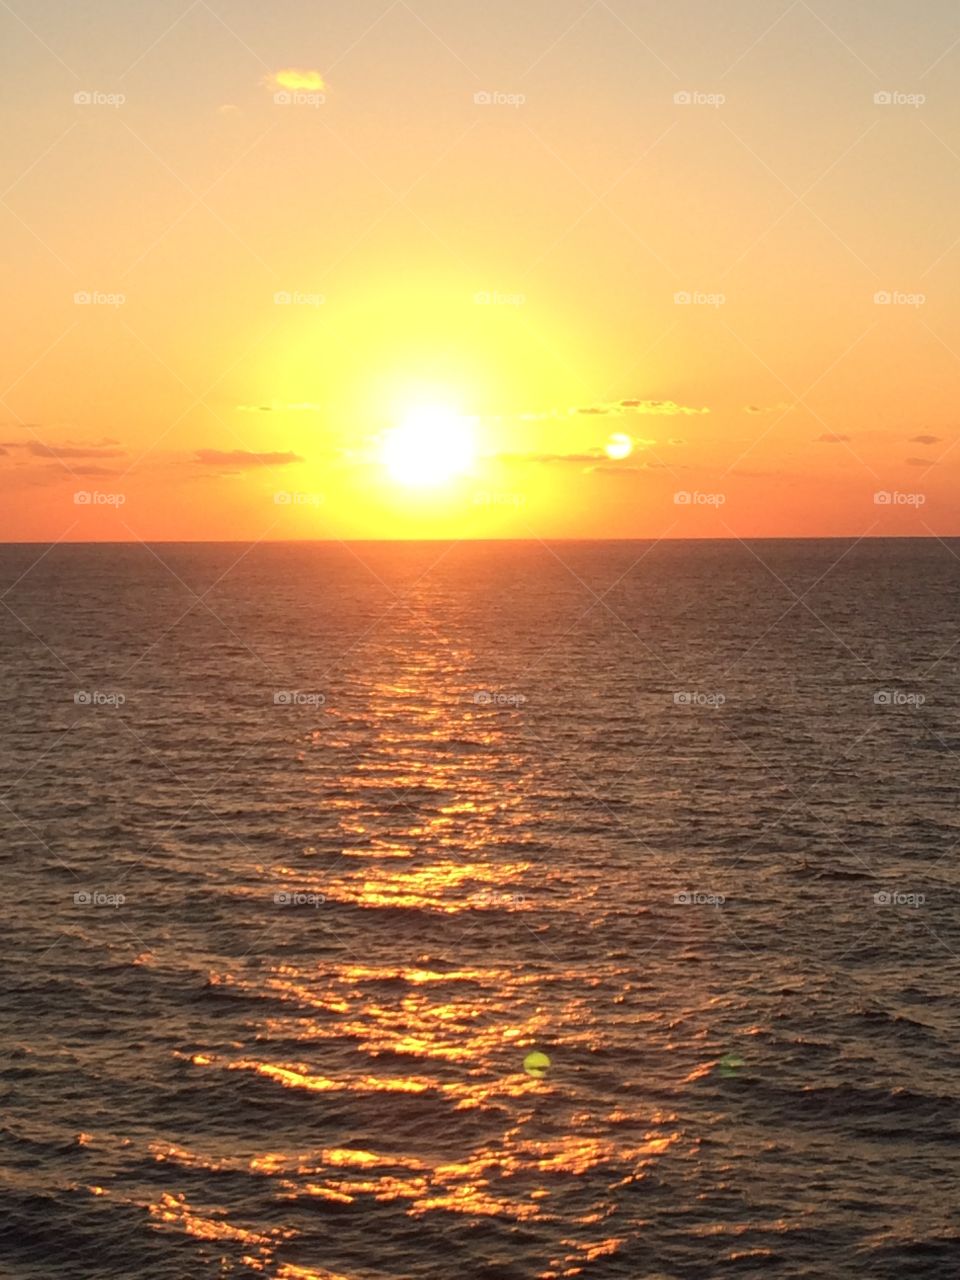 Sunset in the Gulf. This is a sunset in the Gulf of Mexico 